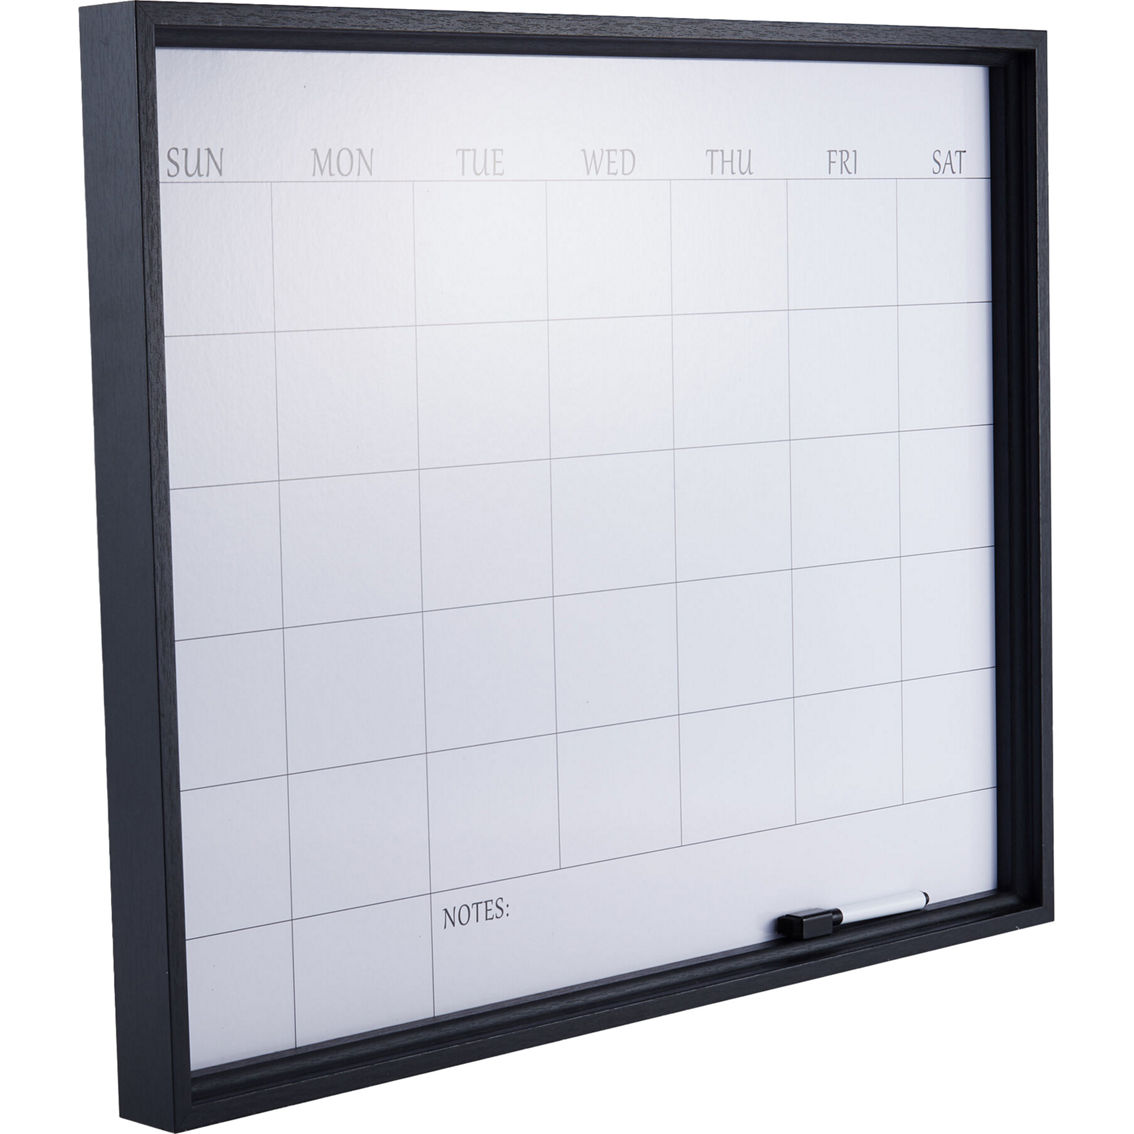 Towle Living 24 x 19 in. Black Calendar Whiteboard with Dry Erase Pen - Image 2 of 5